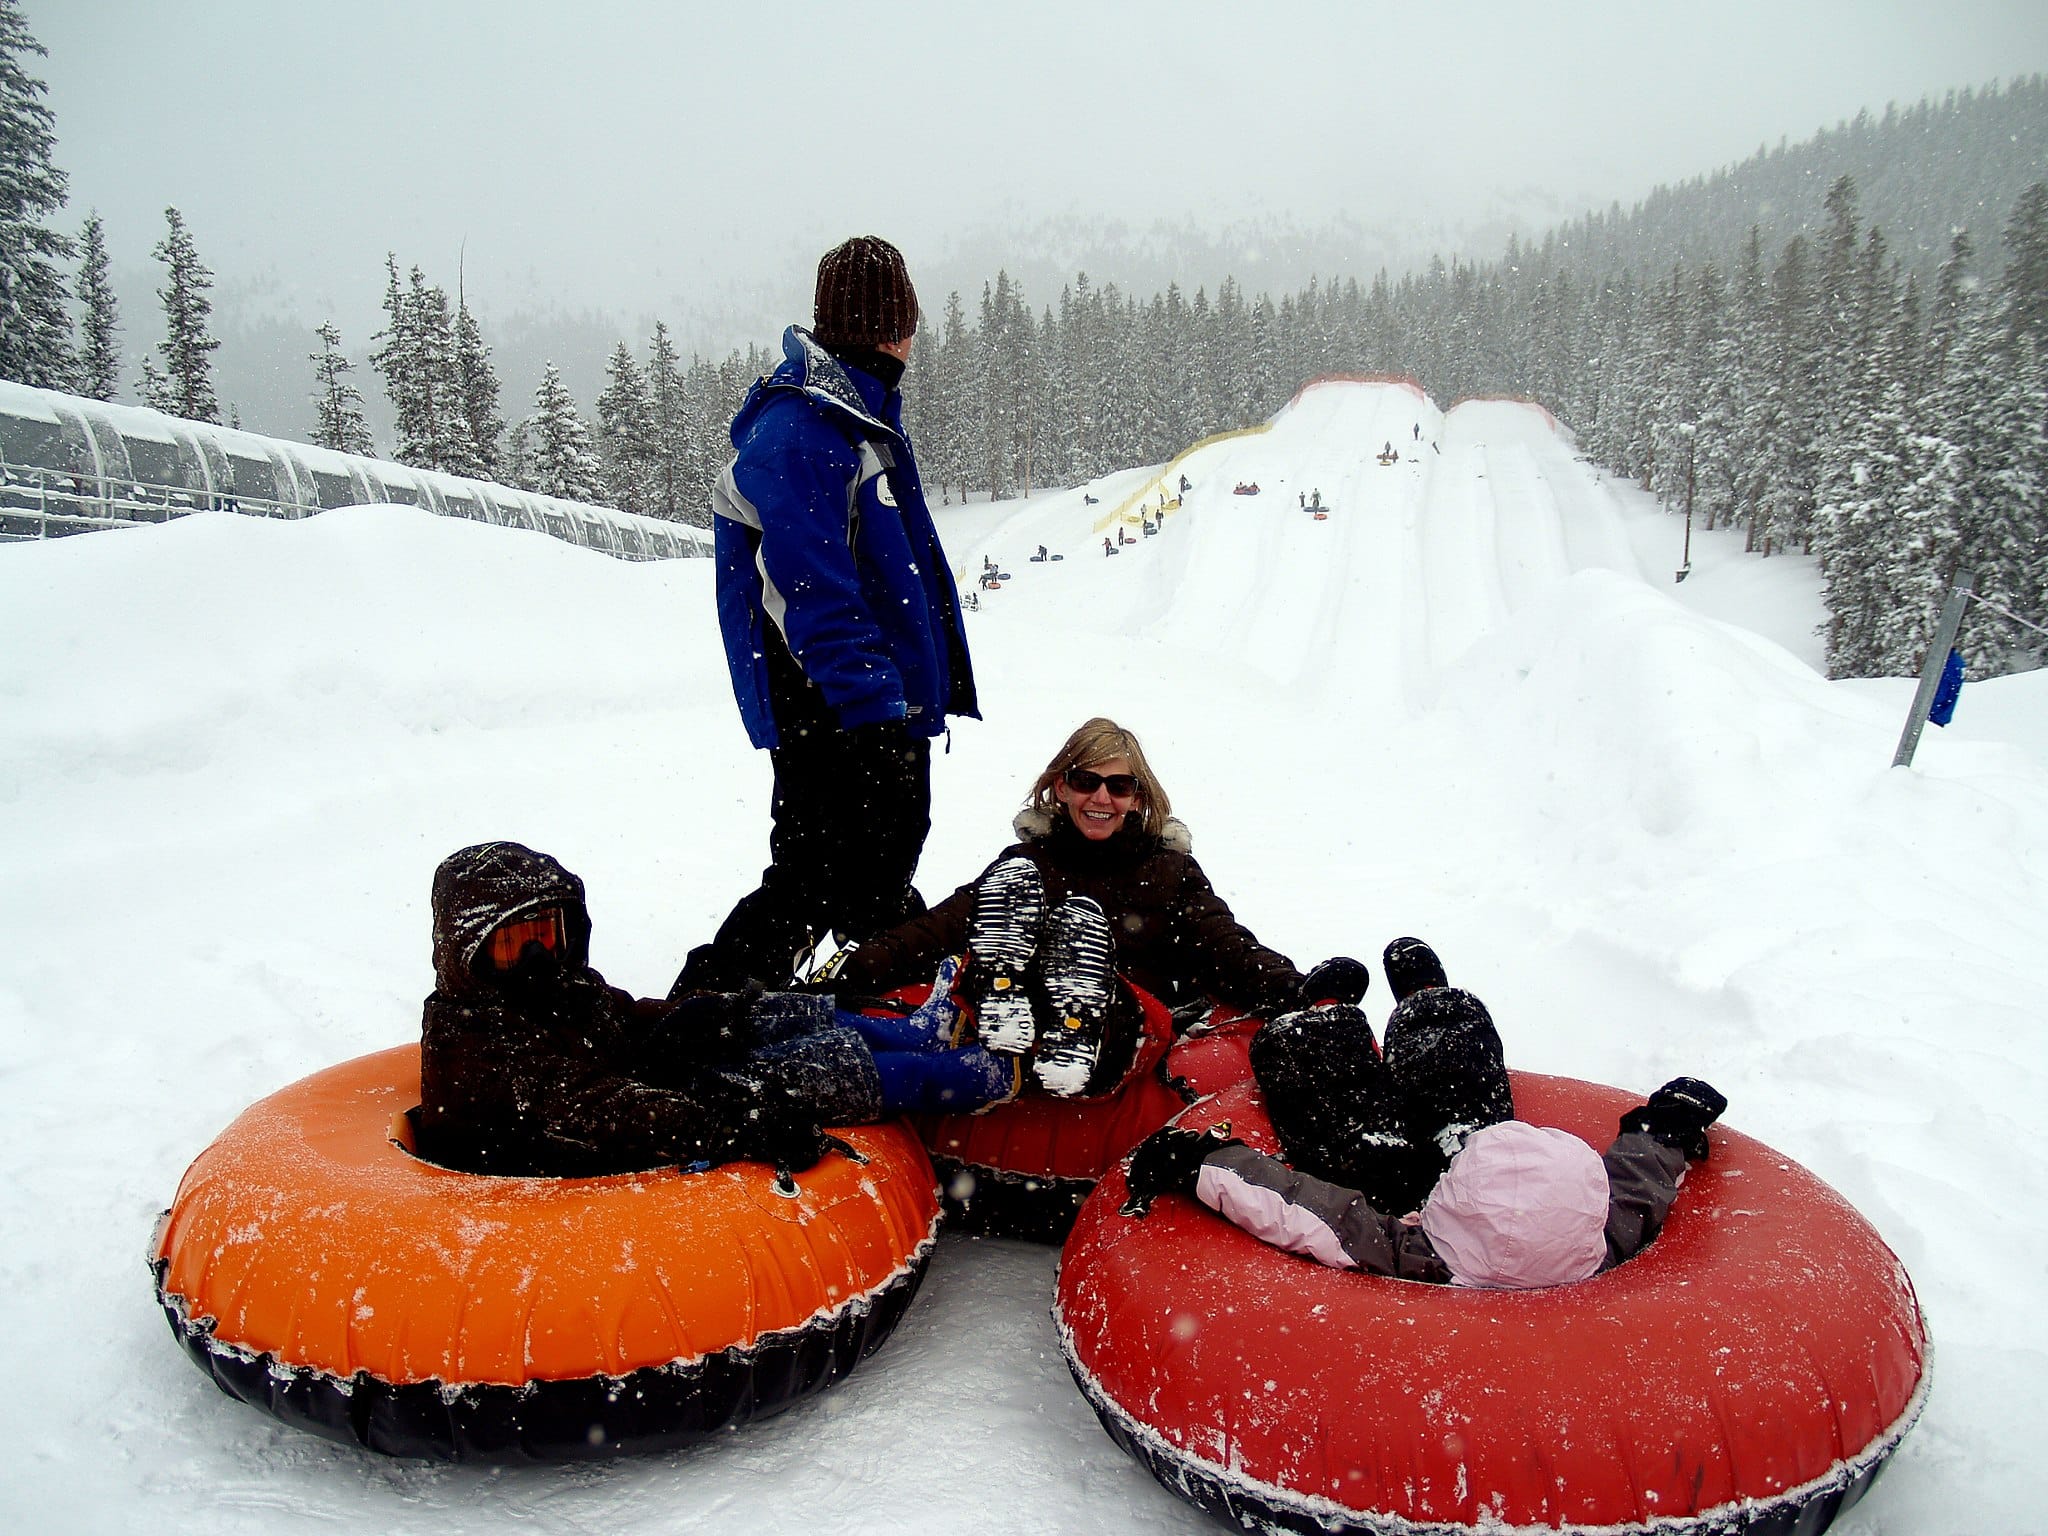 3 people in snow tubes and person standing over them at the bottom of the hill